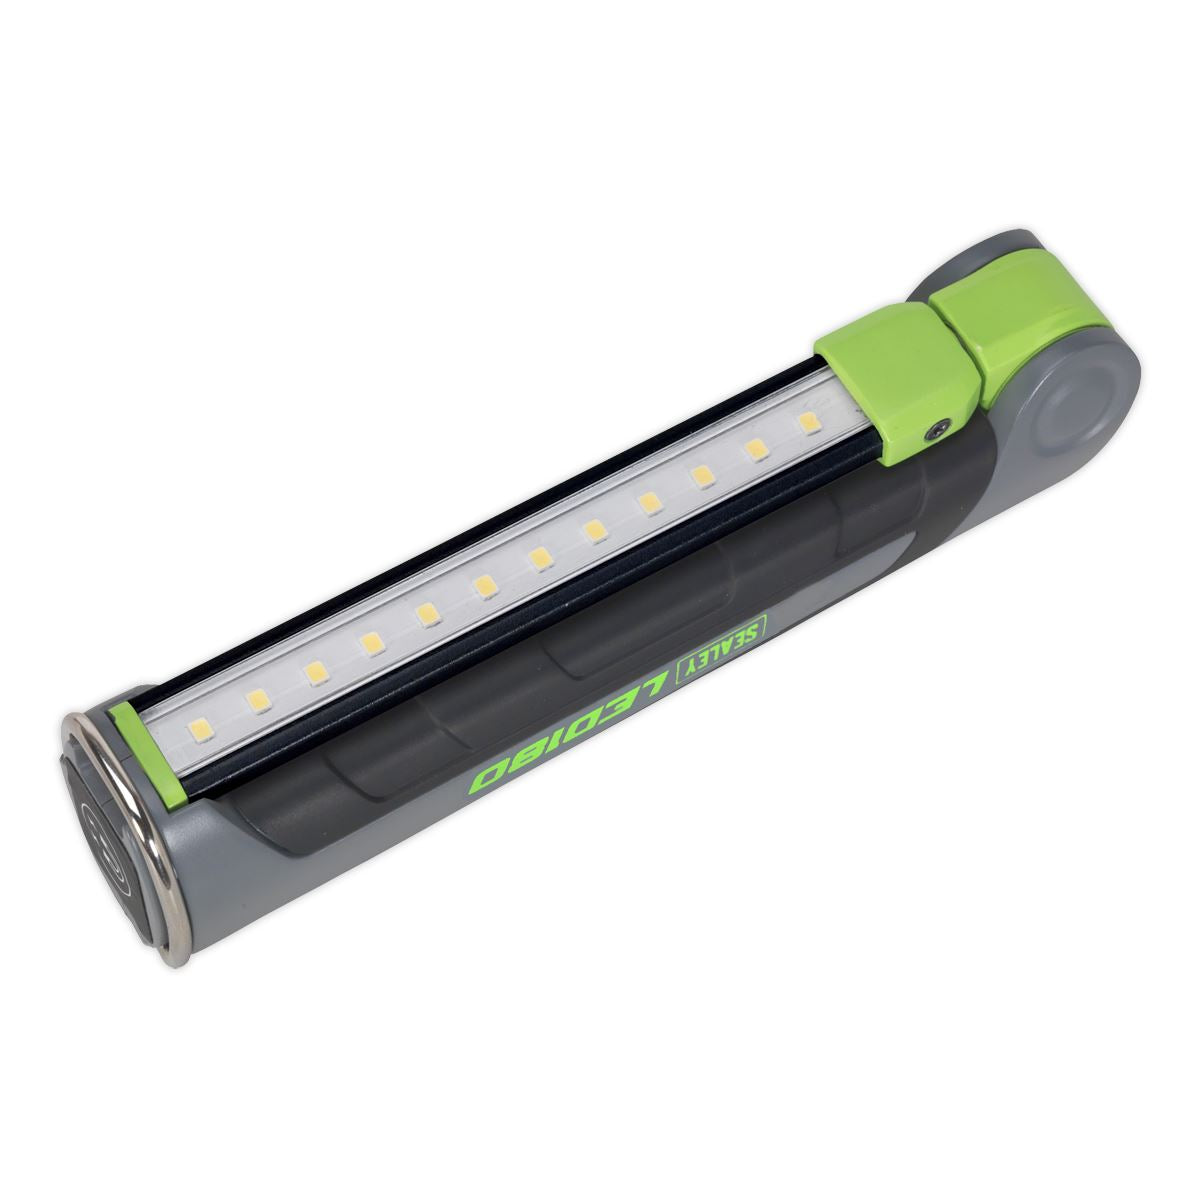 Sealey 12 SMD LED + 1W LED Rechargeable Slim Inspection Lamp Magnetic Base 400 Lumens